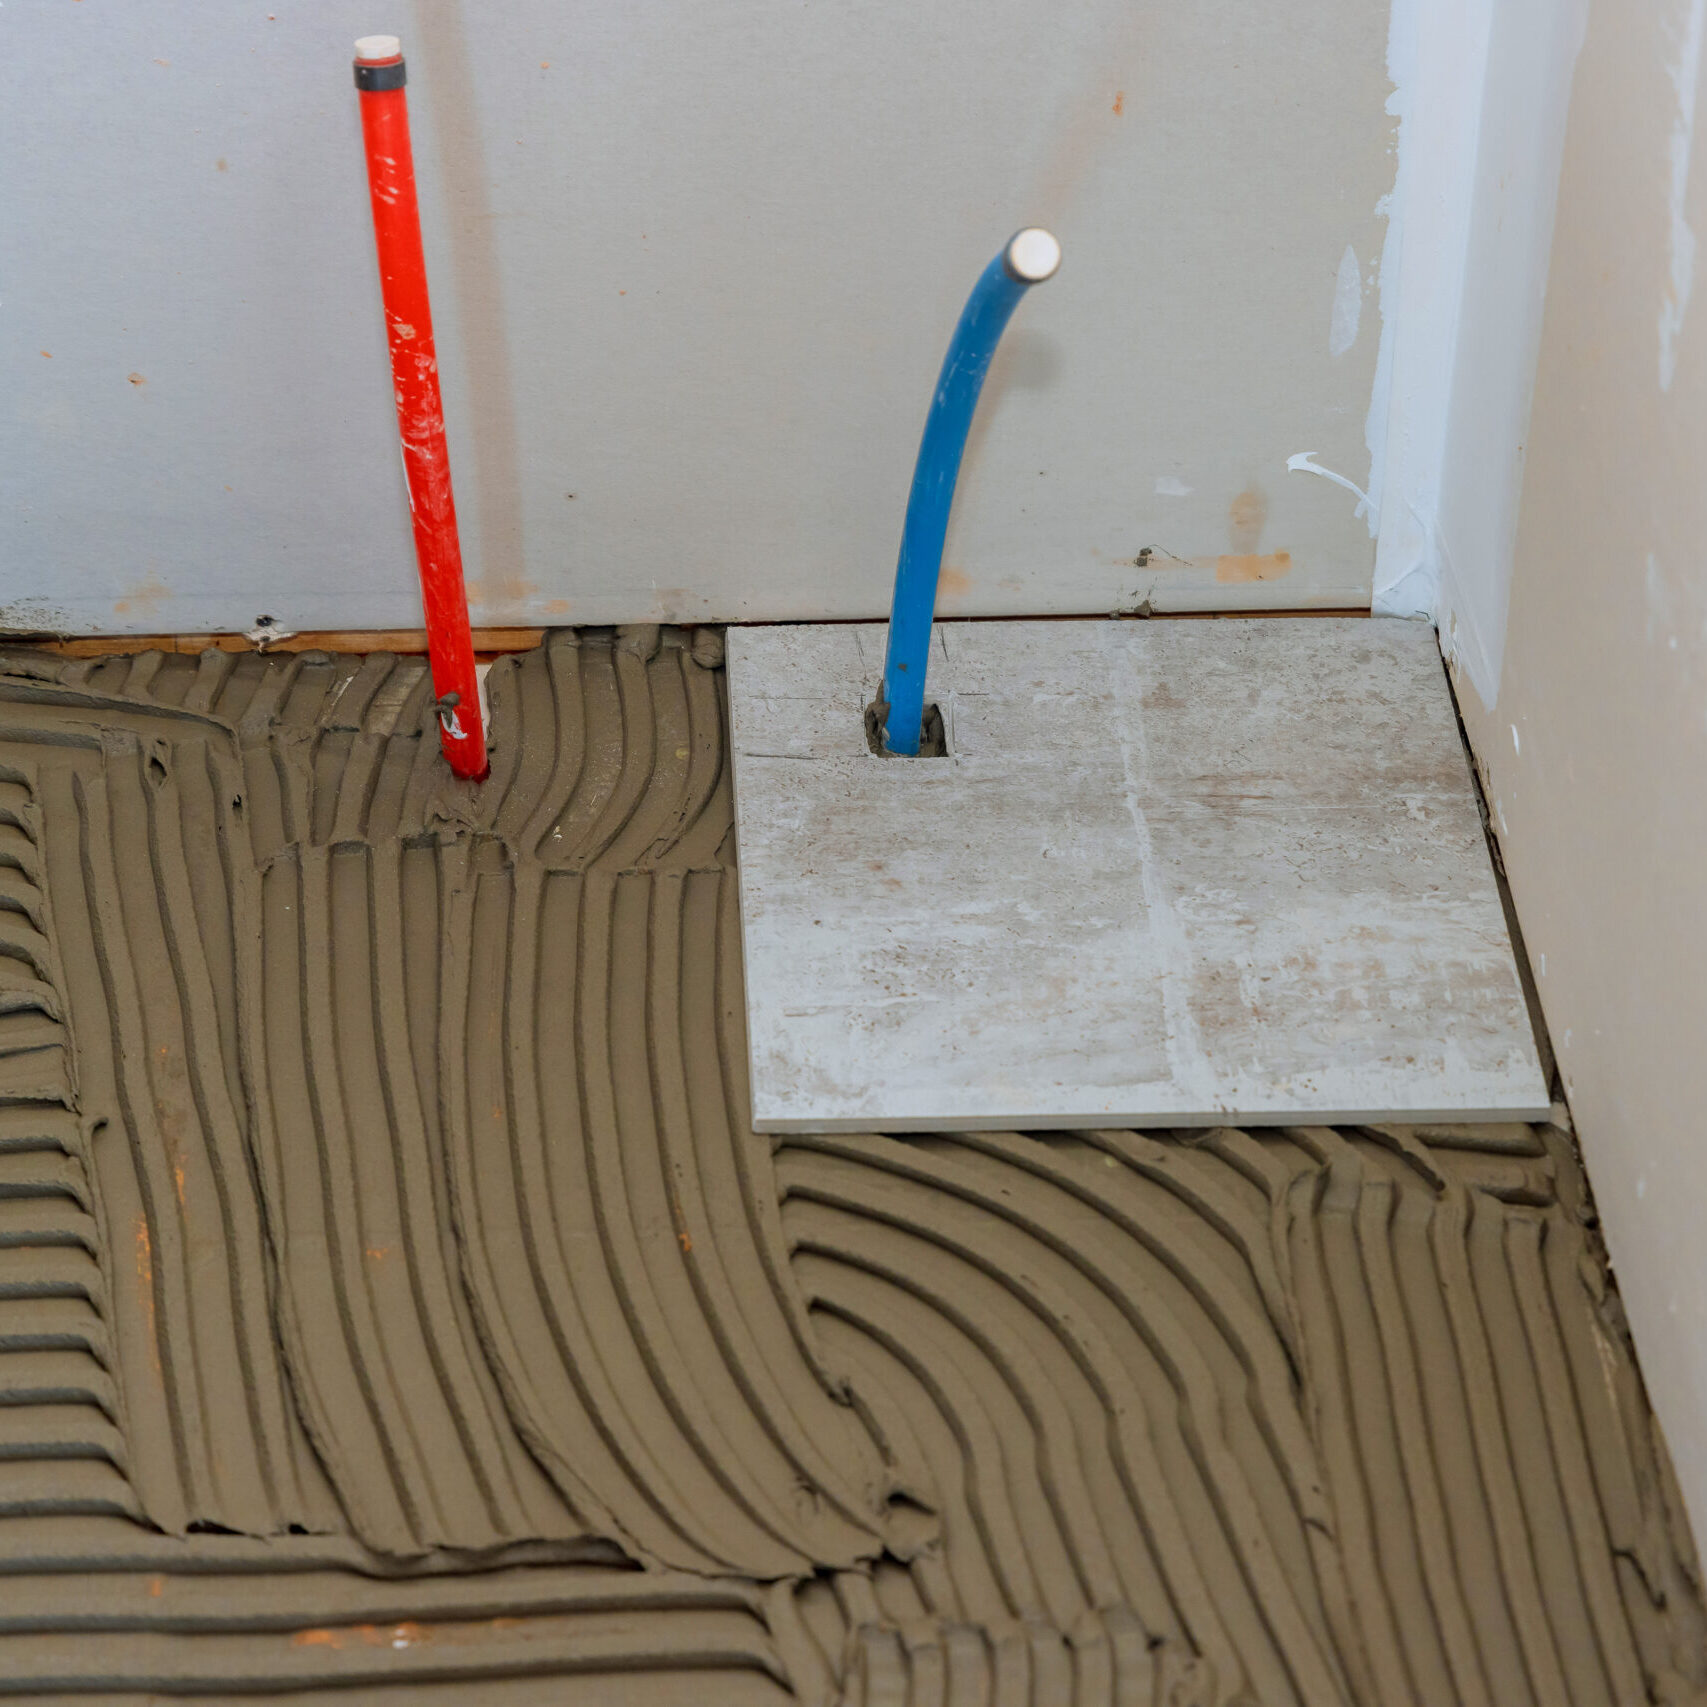 Ceramic tile is being placed over adhesive on bathroom floor by tiler